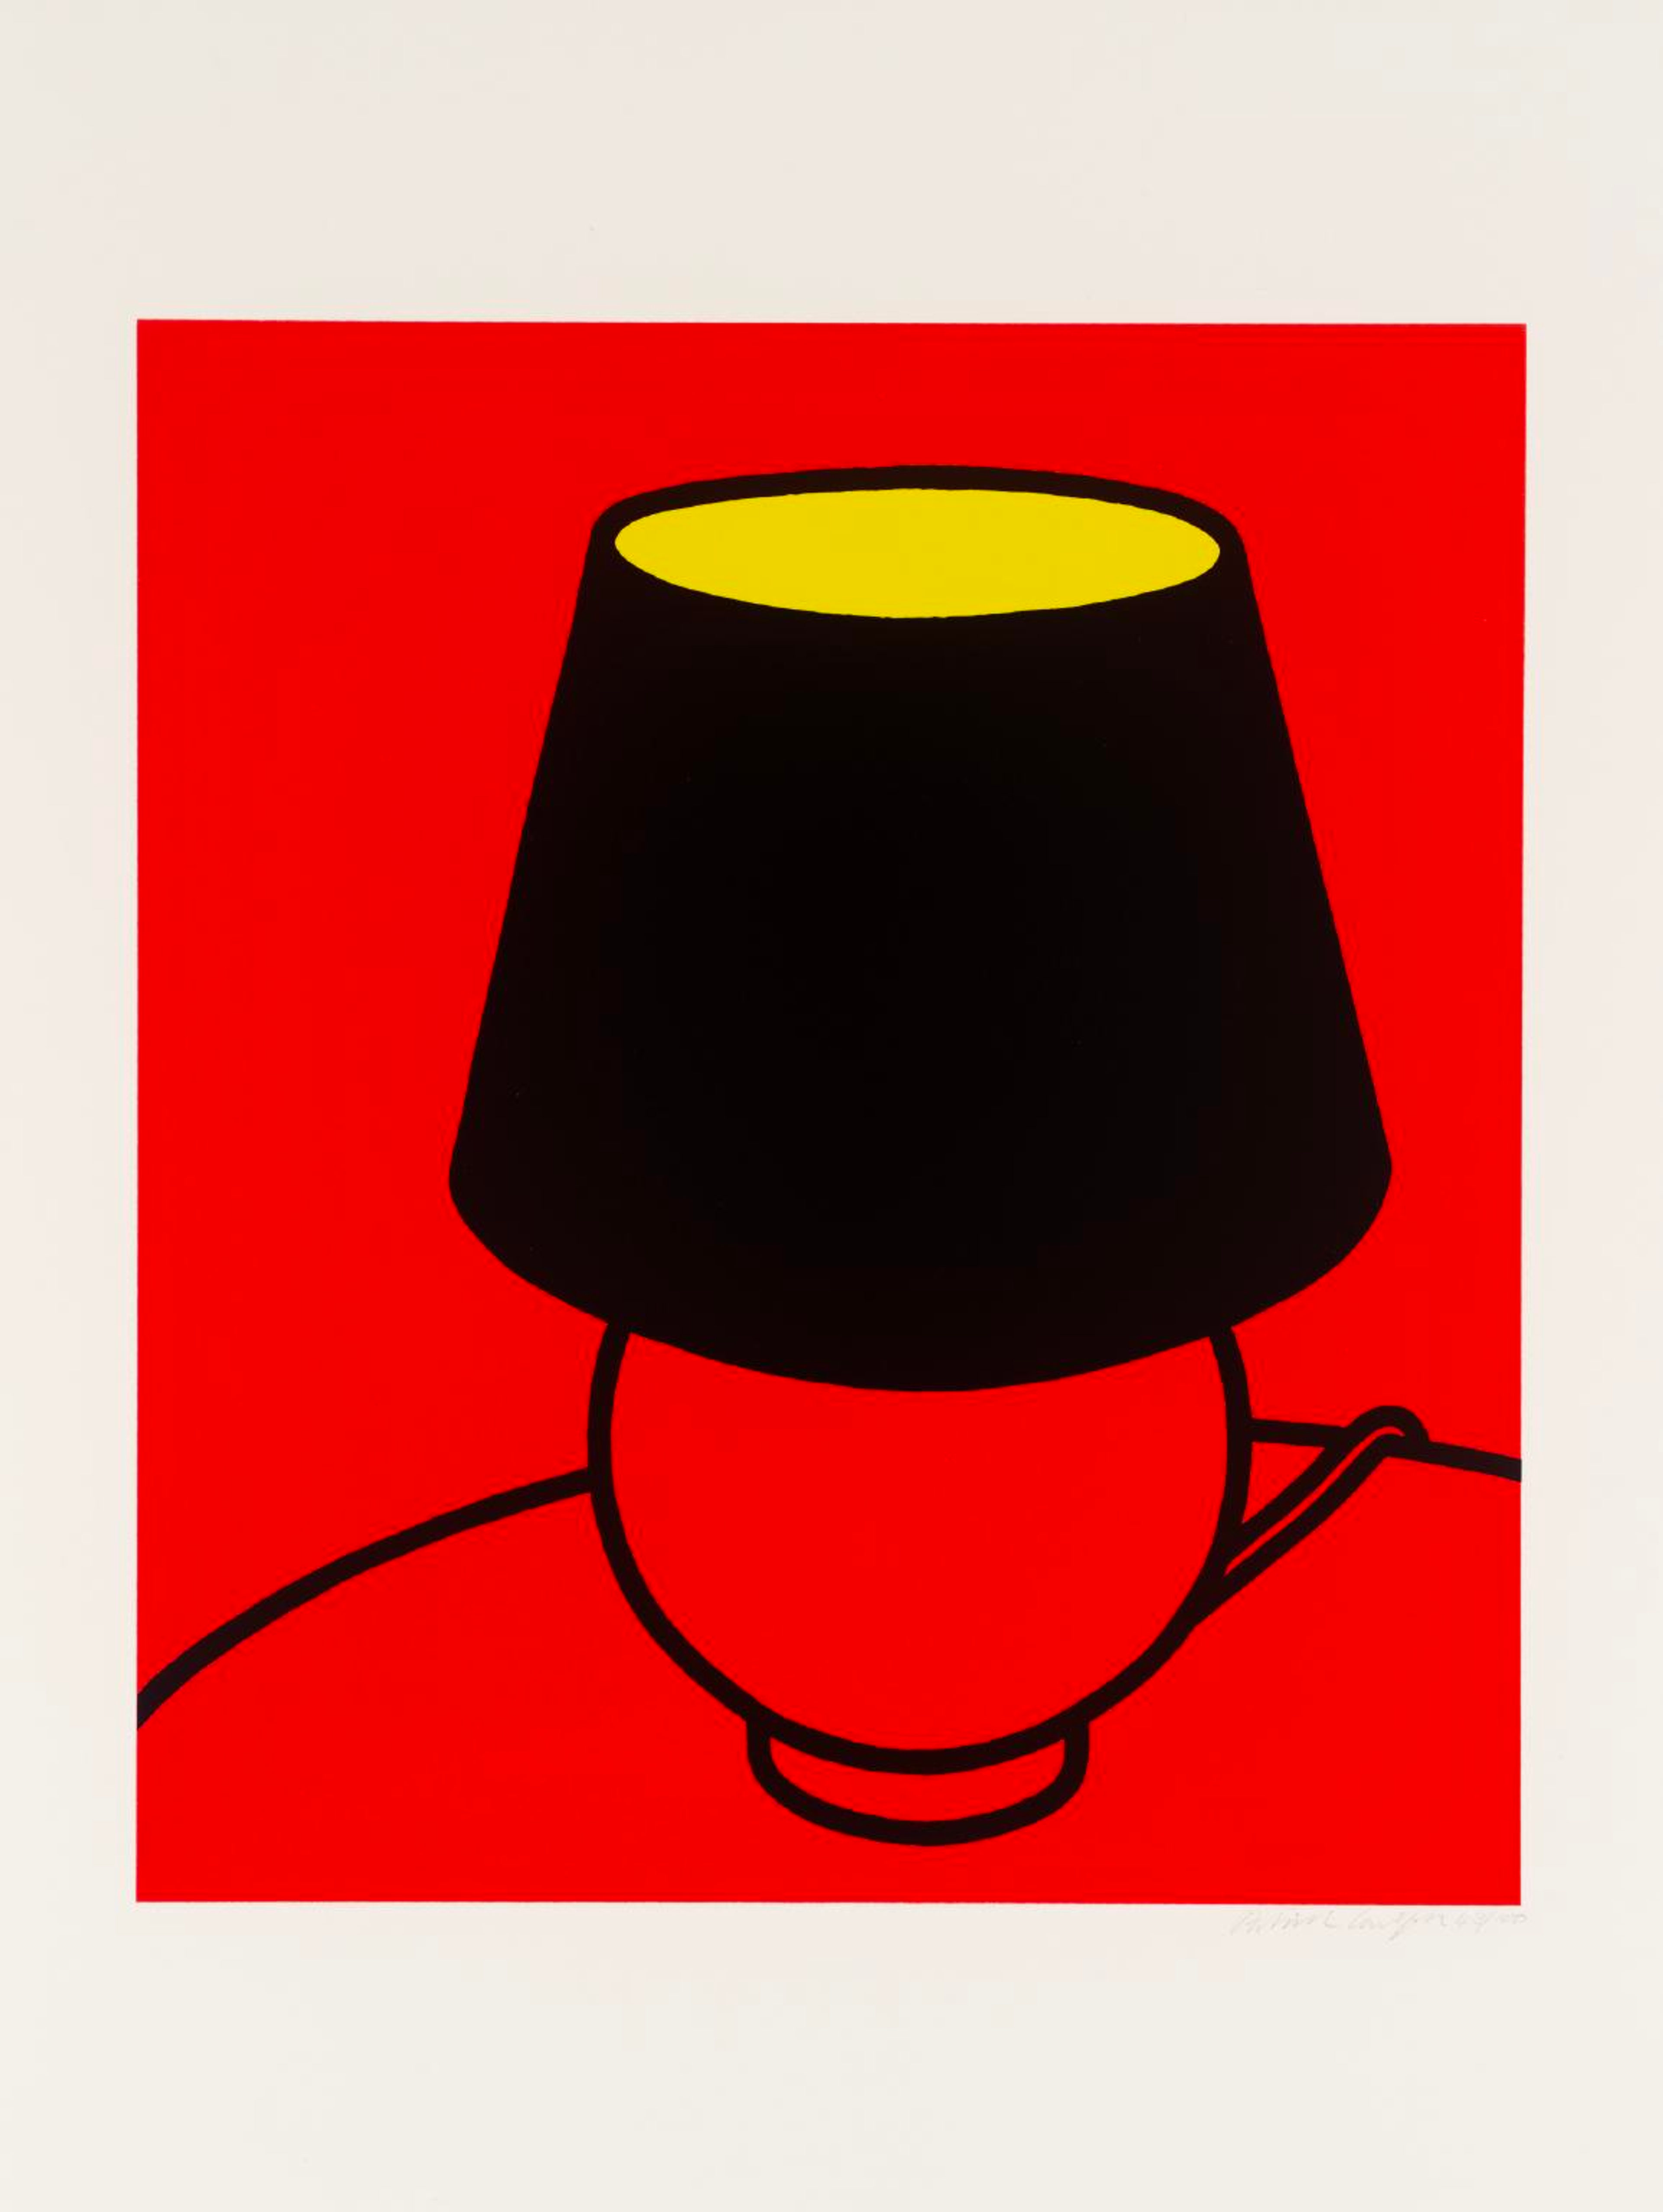 An outline drawing of a table lamp with a light shining through against a vibrant red background.